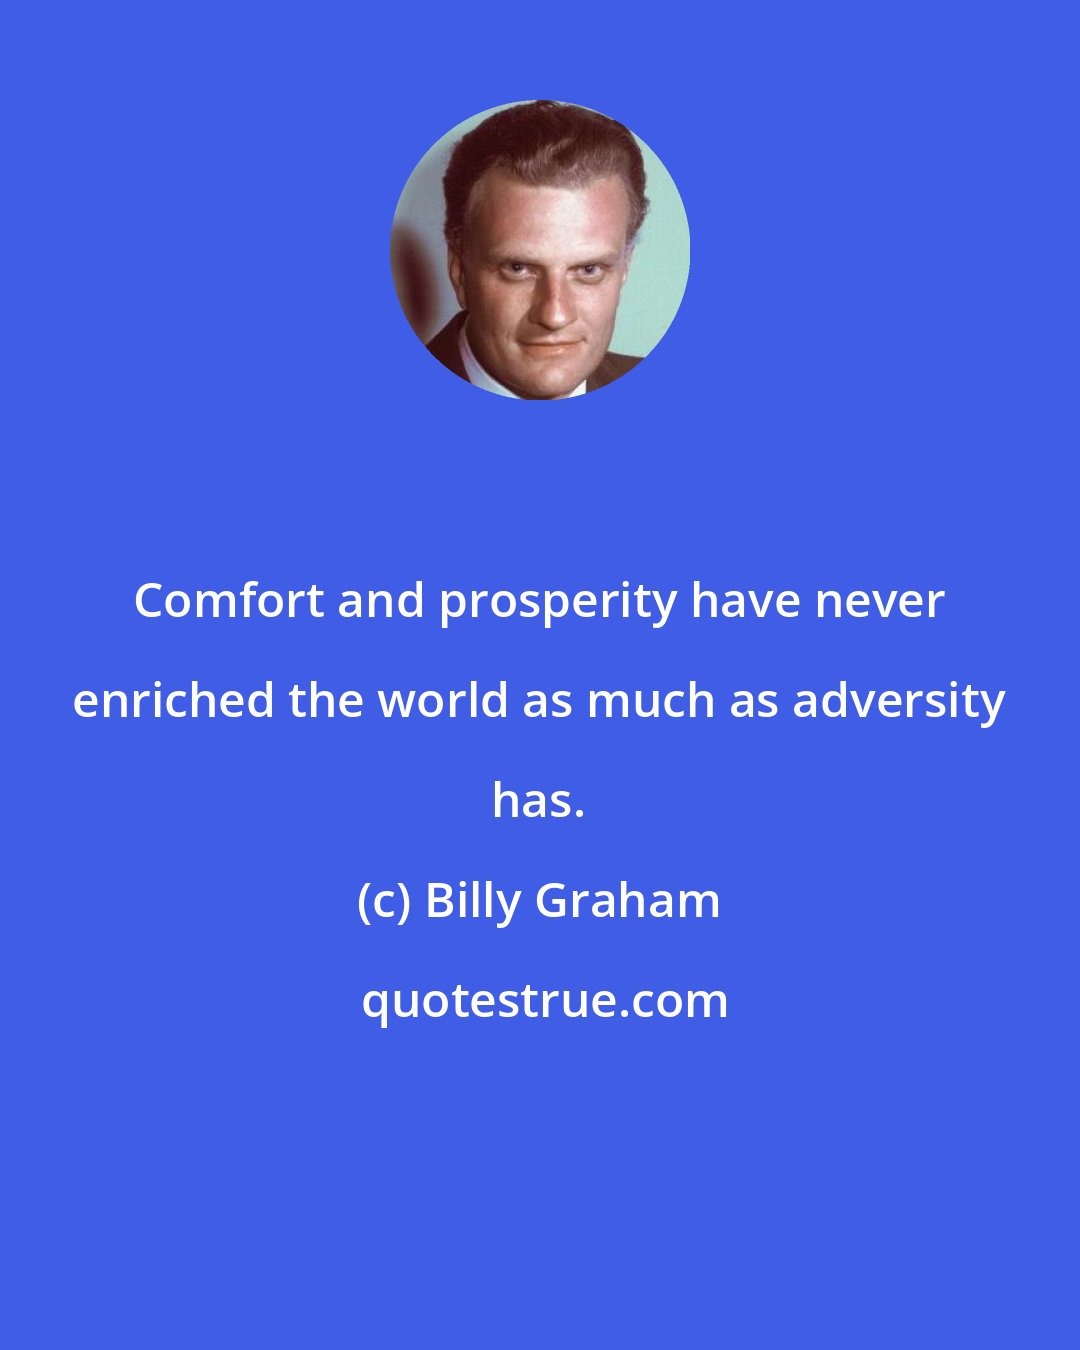 Billy Graham: Comfort and prosperity have never enriched the world as much as adversity has.